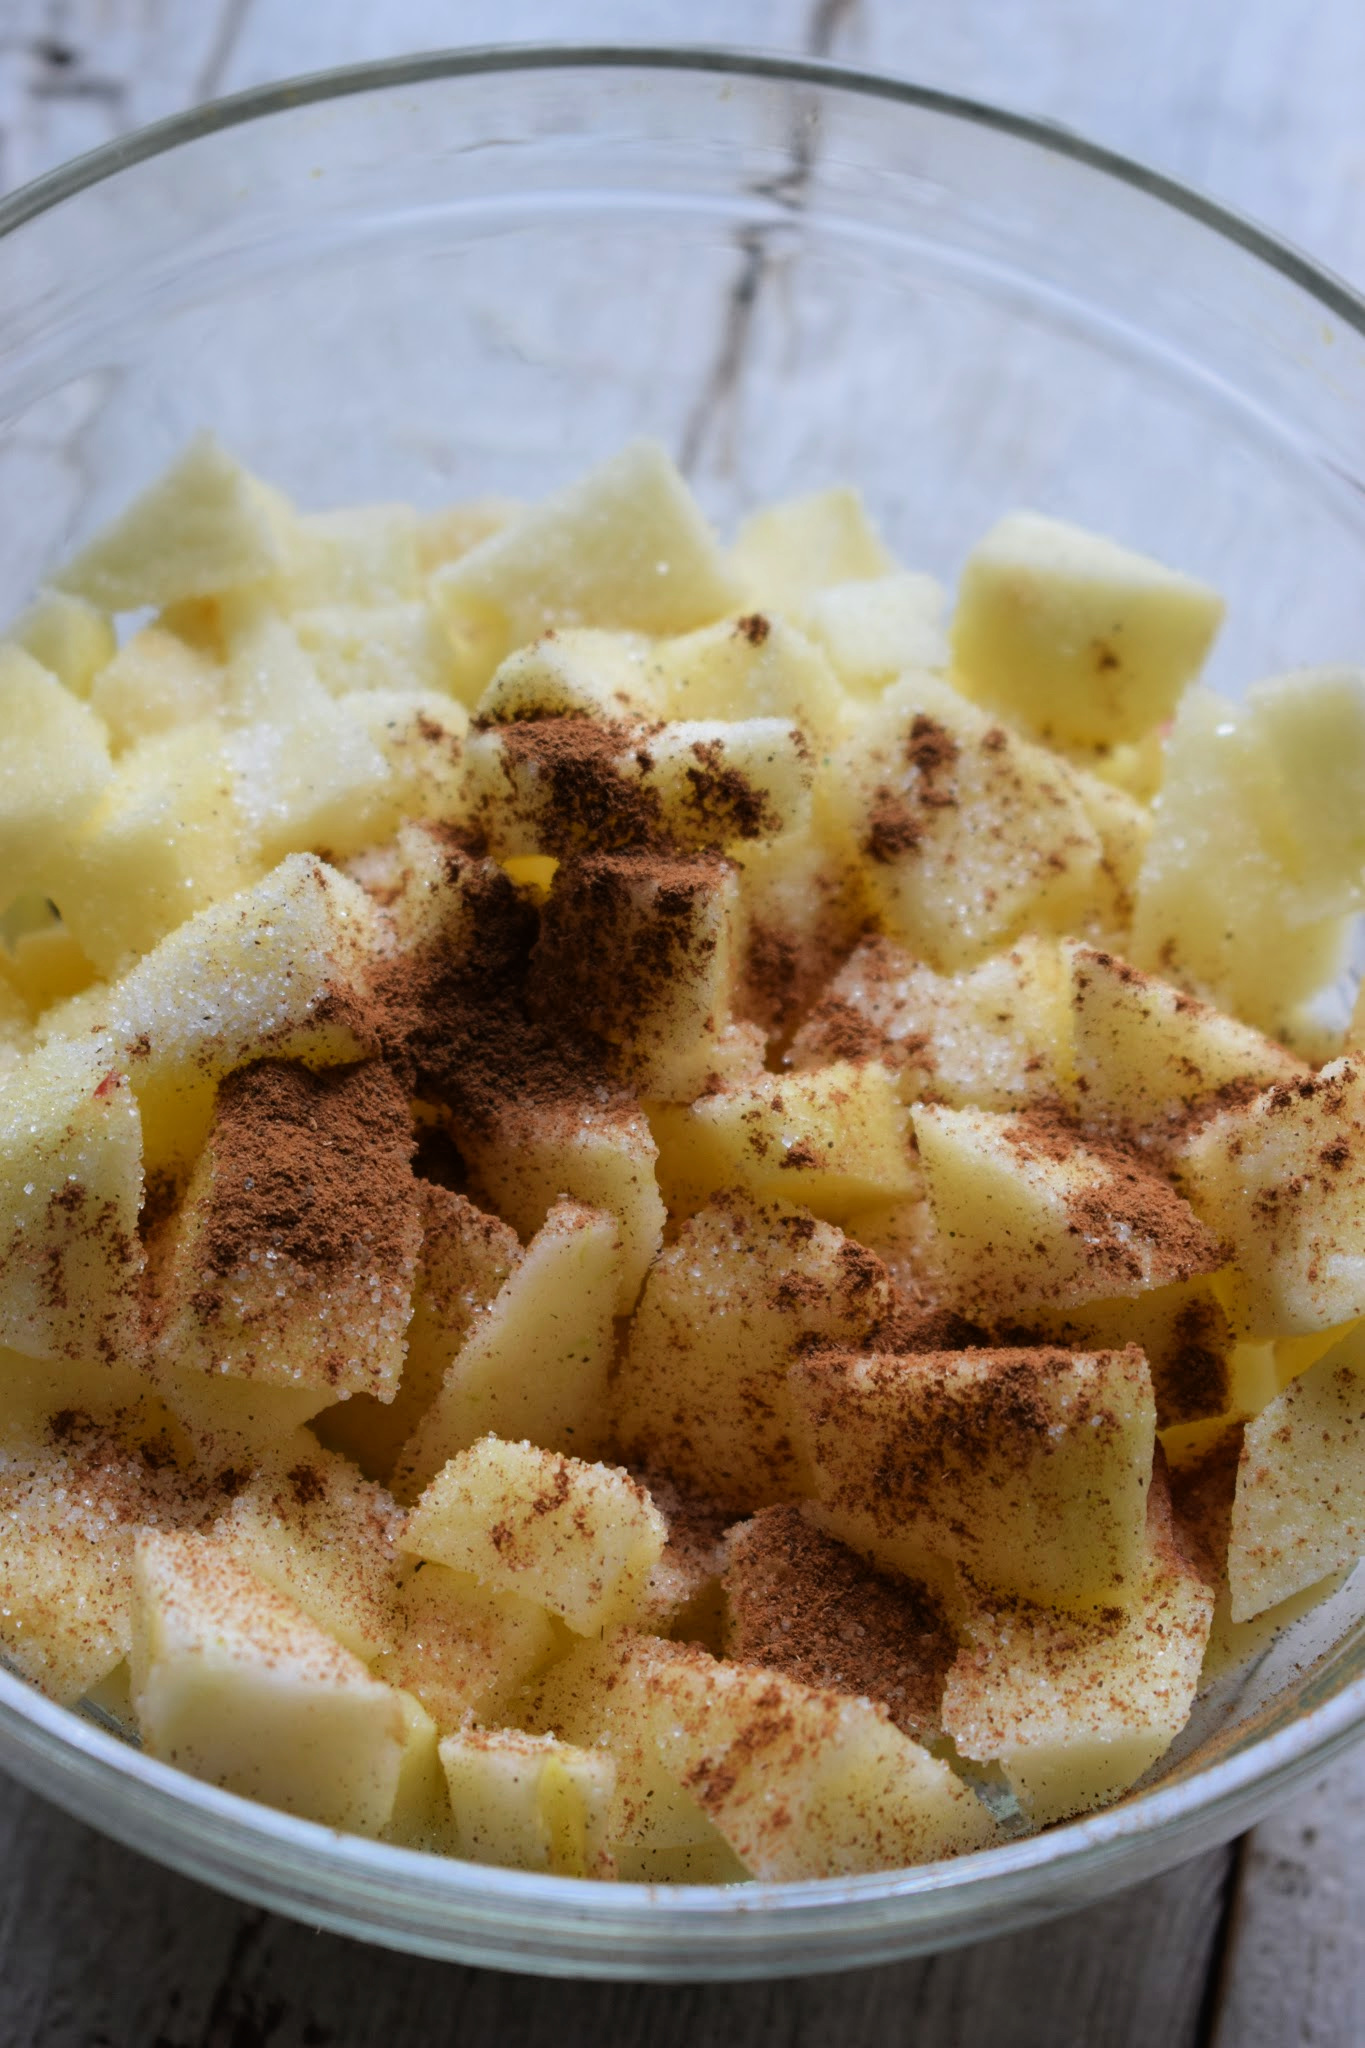 Apples, cinnamon and sugar in a bowl to make mini apple crumbles.